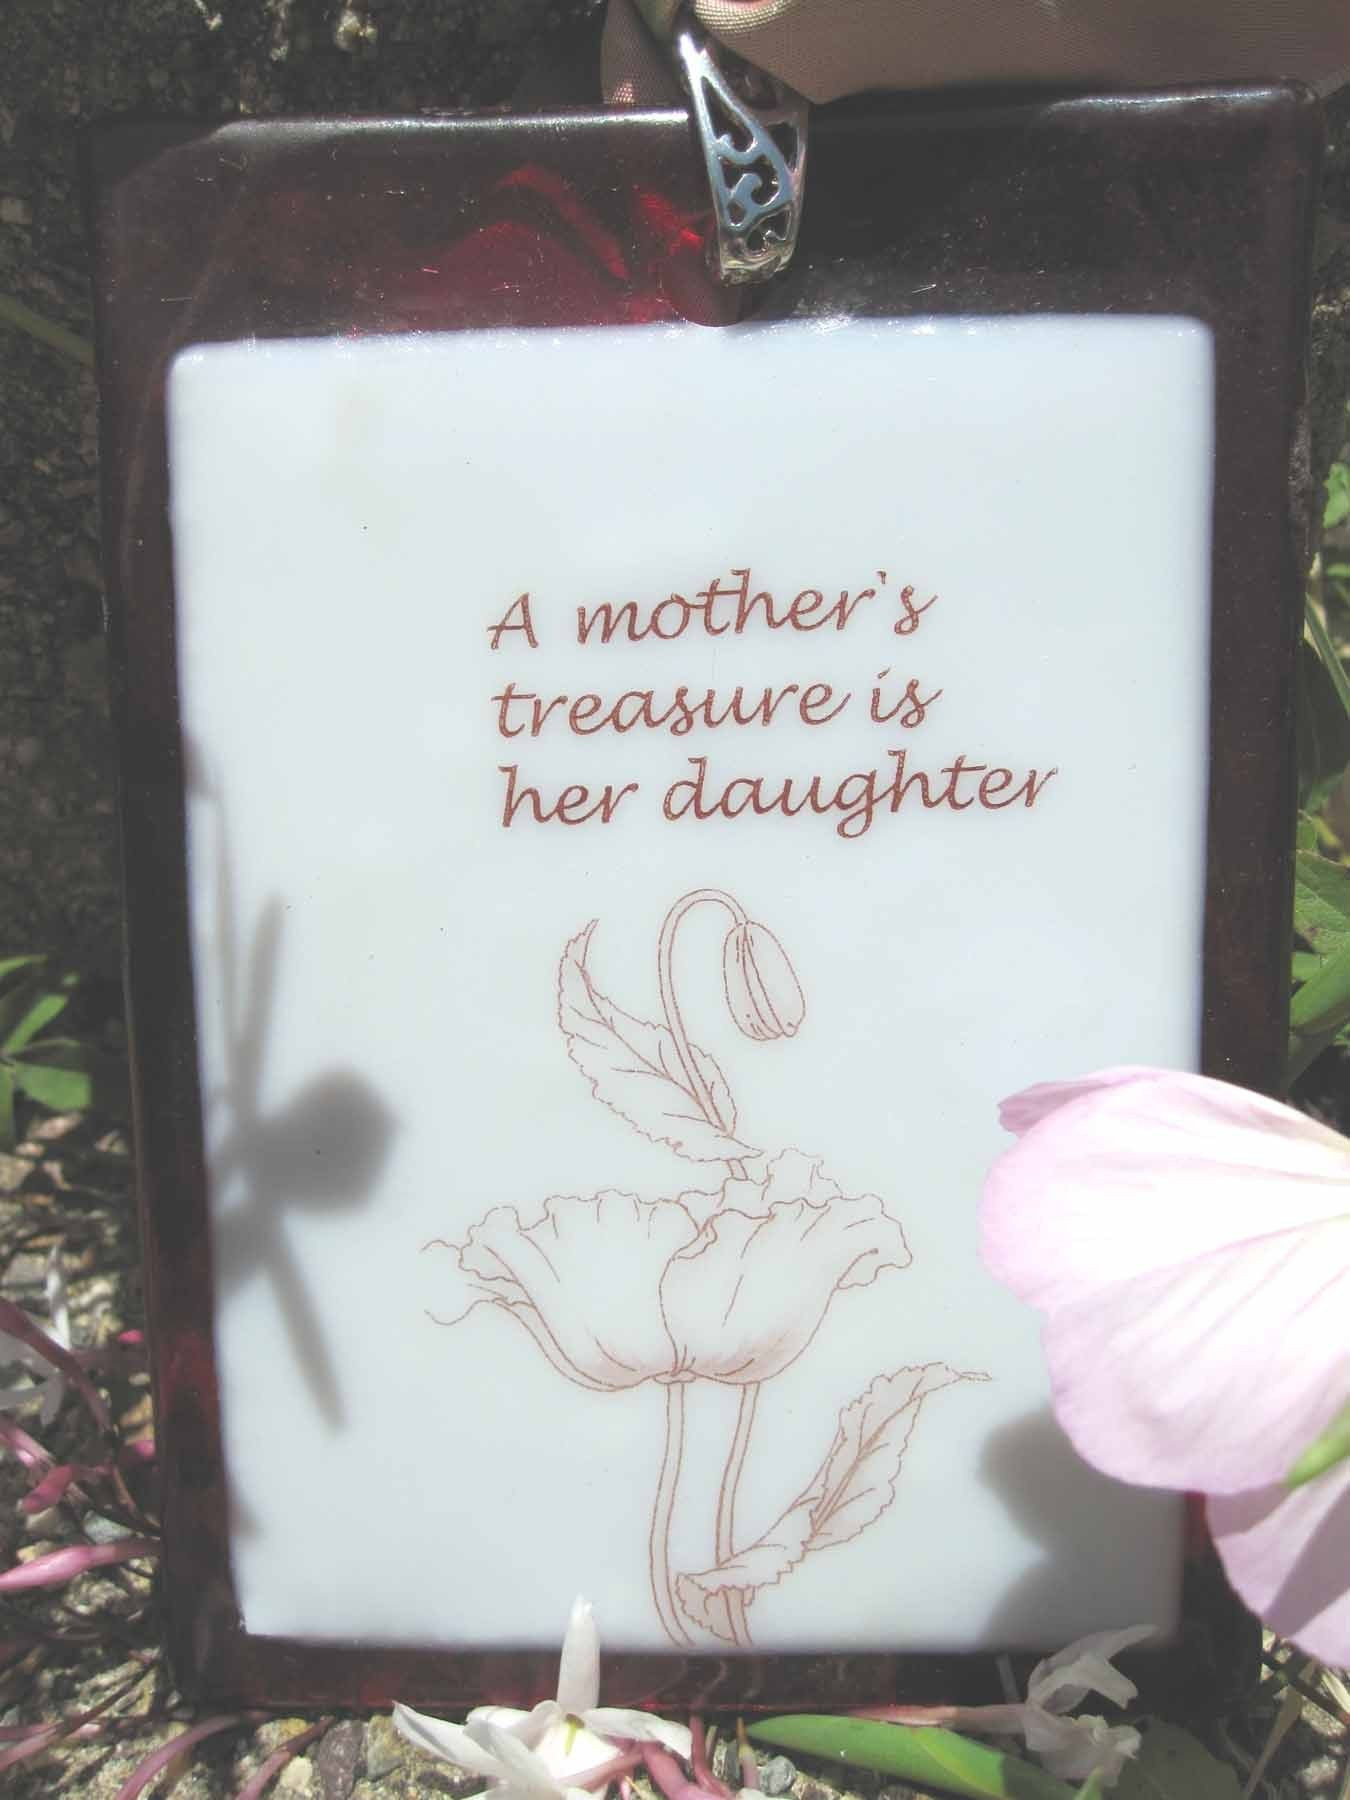 Quotes About A Mother'S Love For Her Daughter
 A Mothers treasure is her daughter